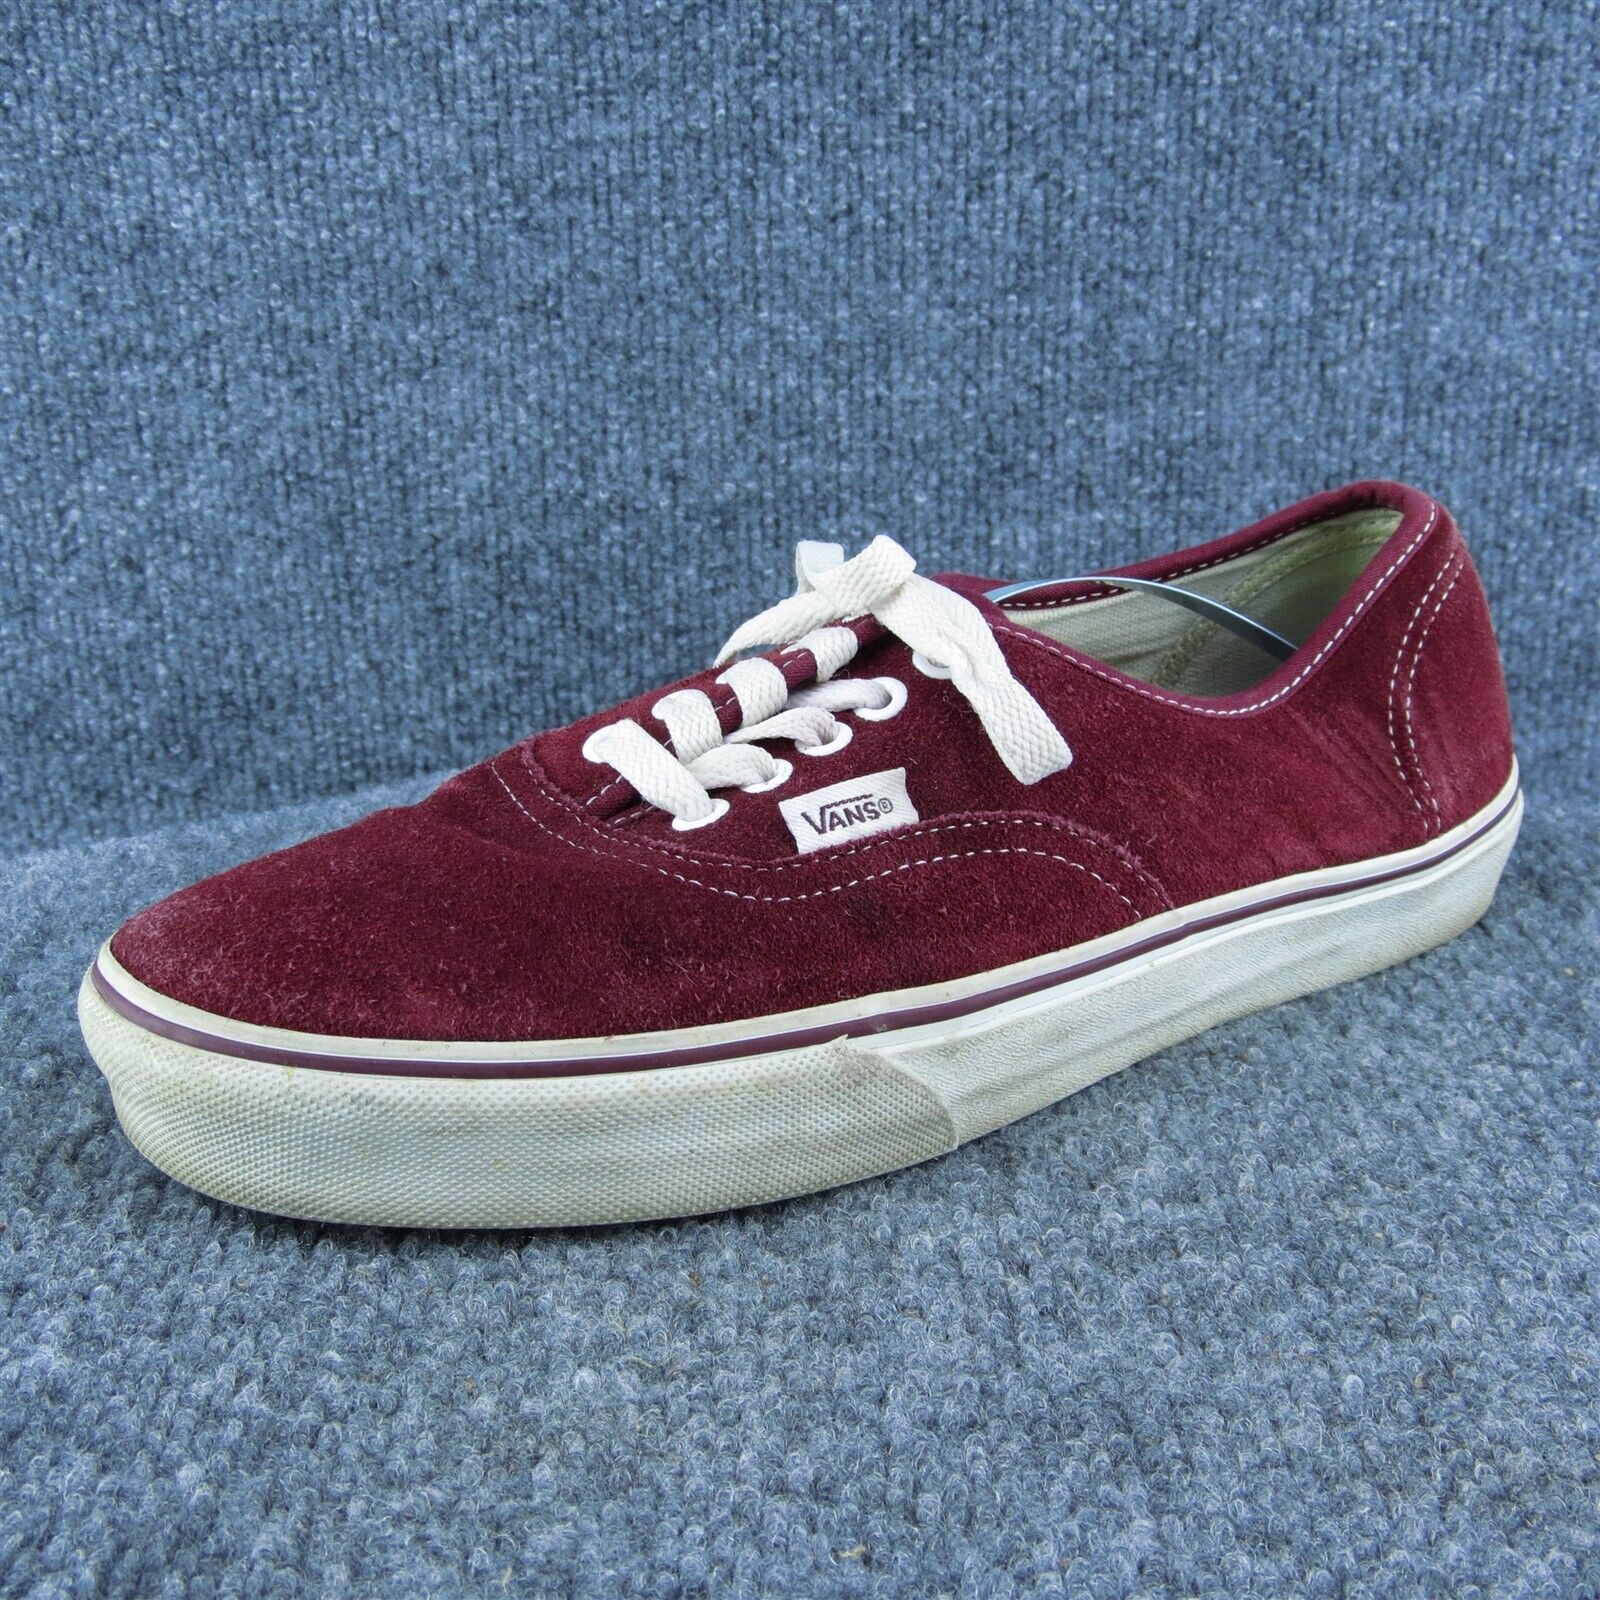 Primary image for VANS Skateboarding Men Sneaker Shoes Red Suede Lace Up Size 8.5 Medium